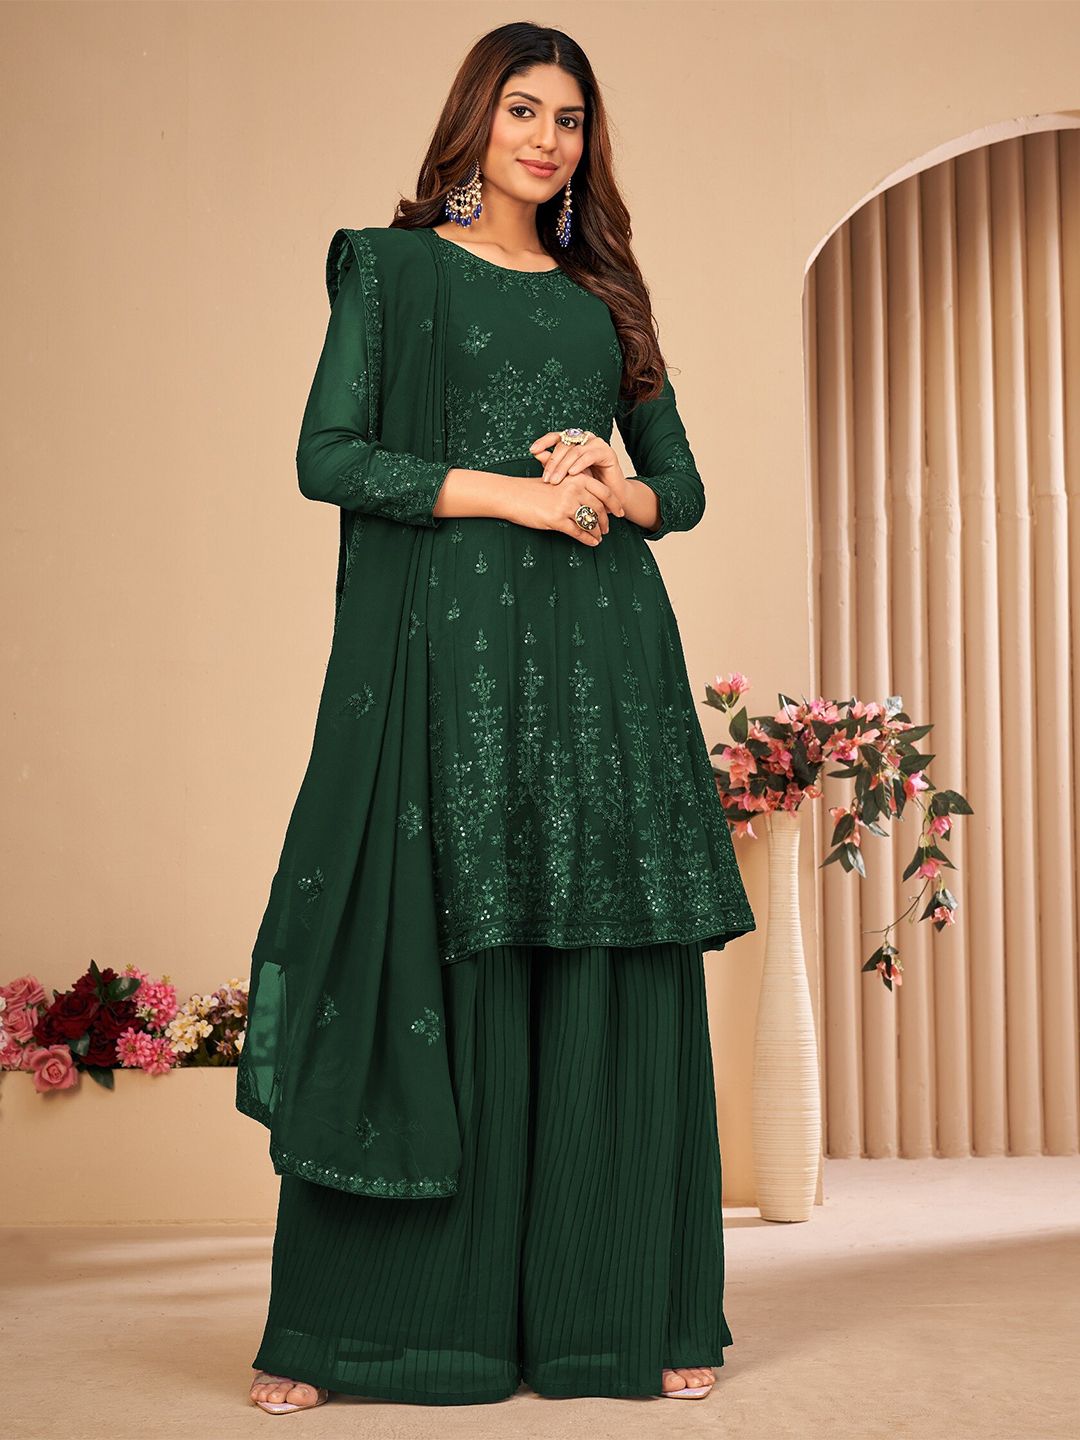 Divine International Trading Co Green Embroidered Unstitched Dress Material Price in India